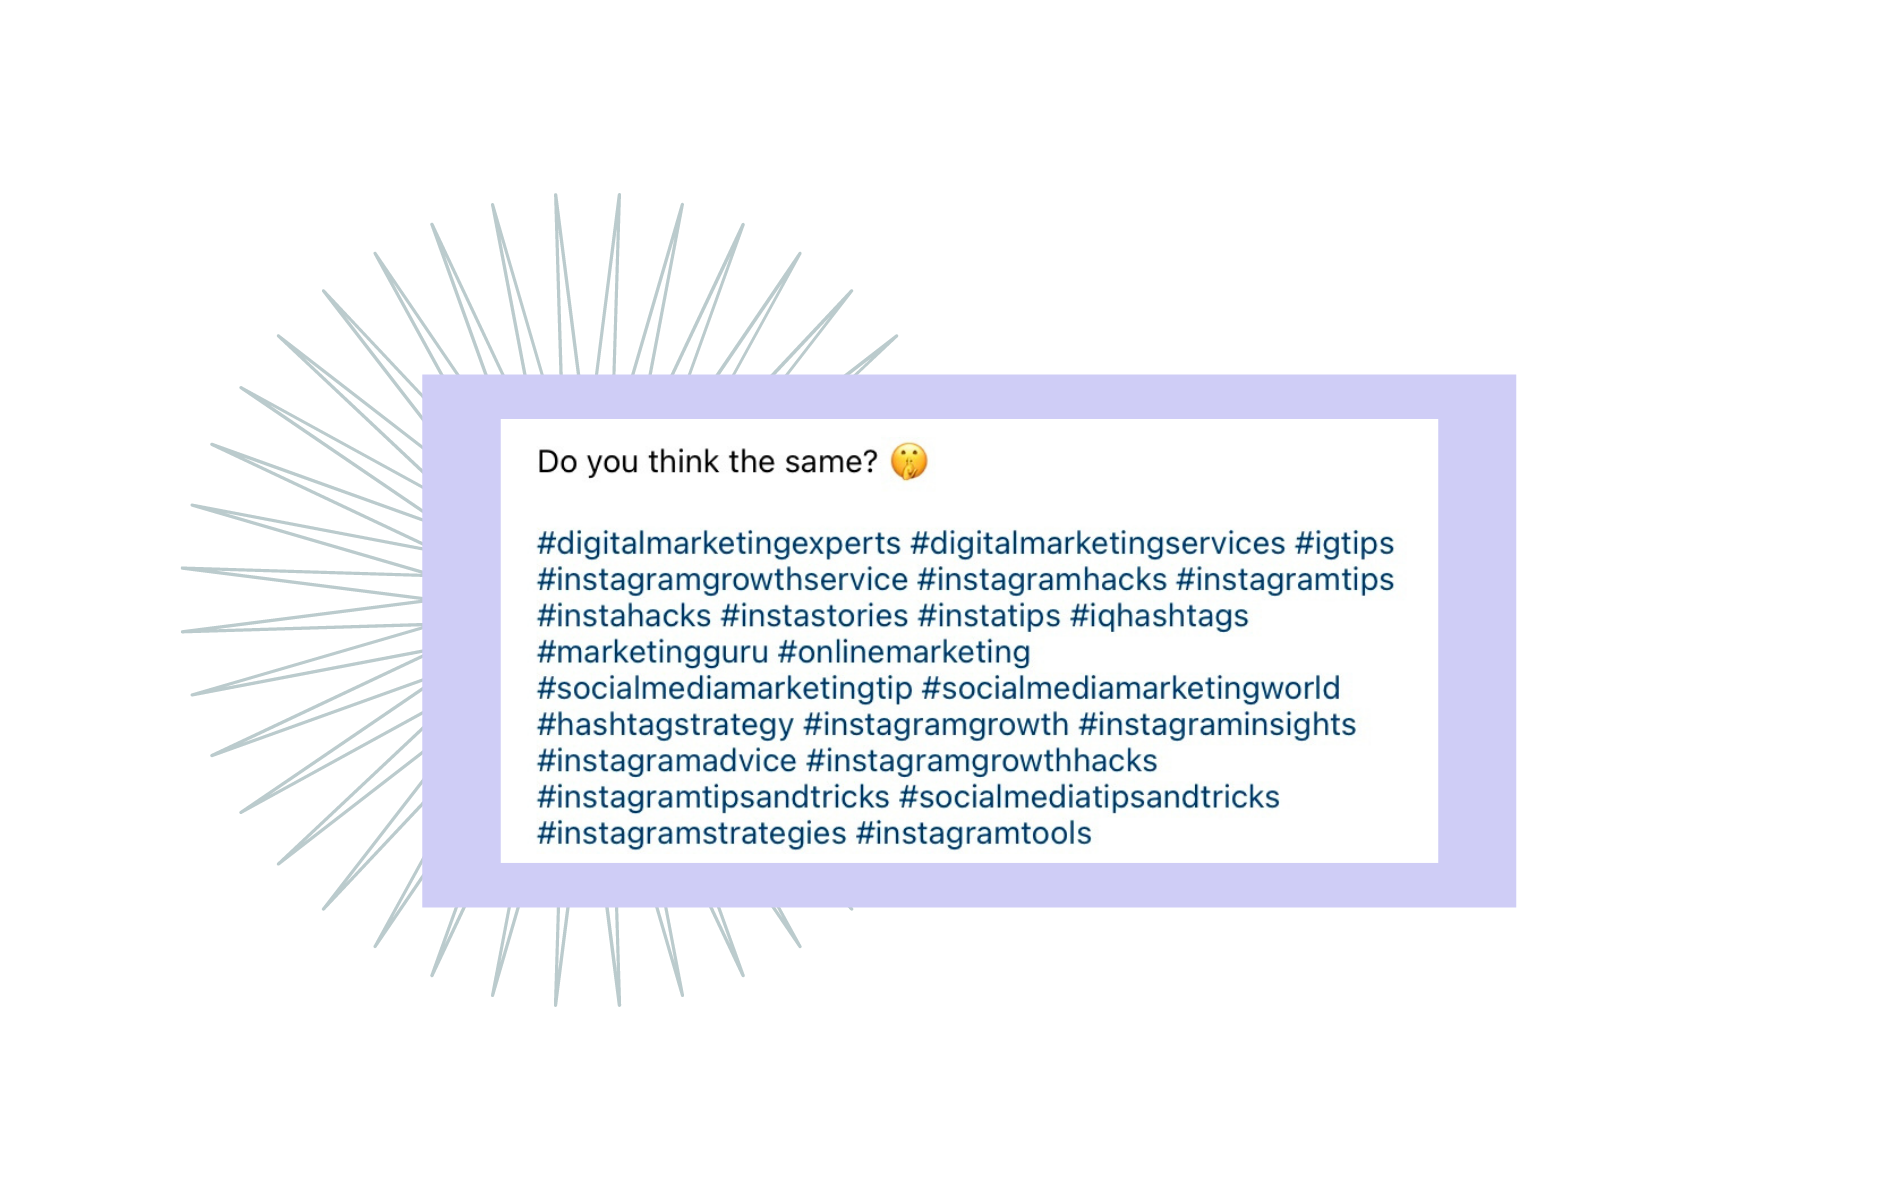 Why are hashtags so important on Instagram